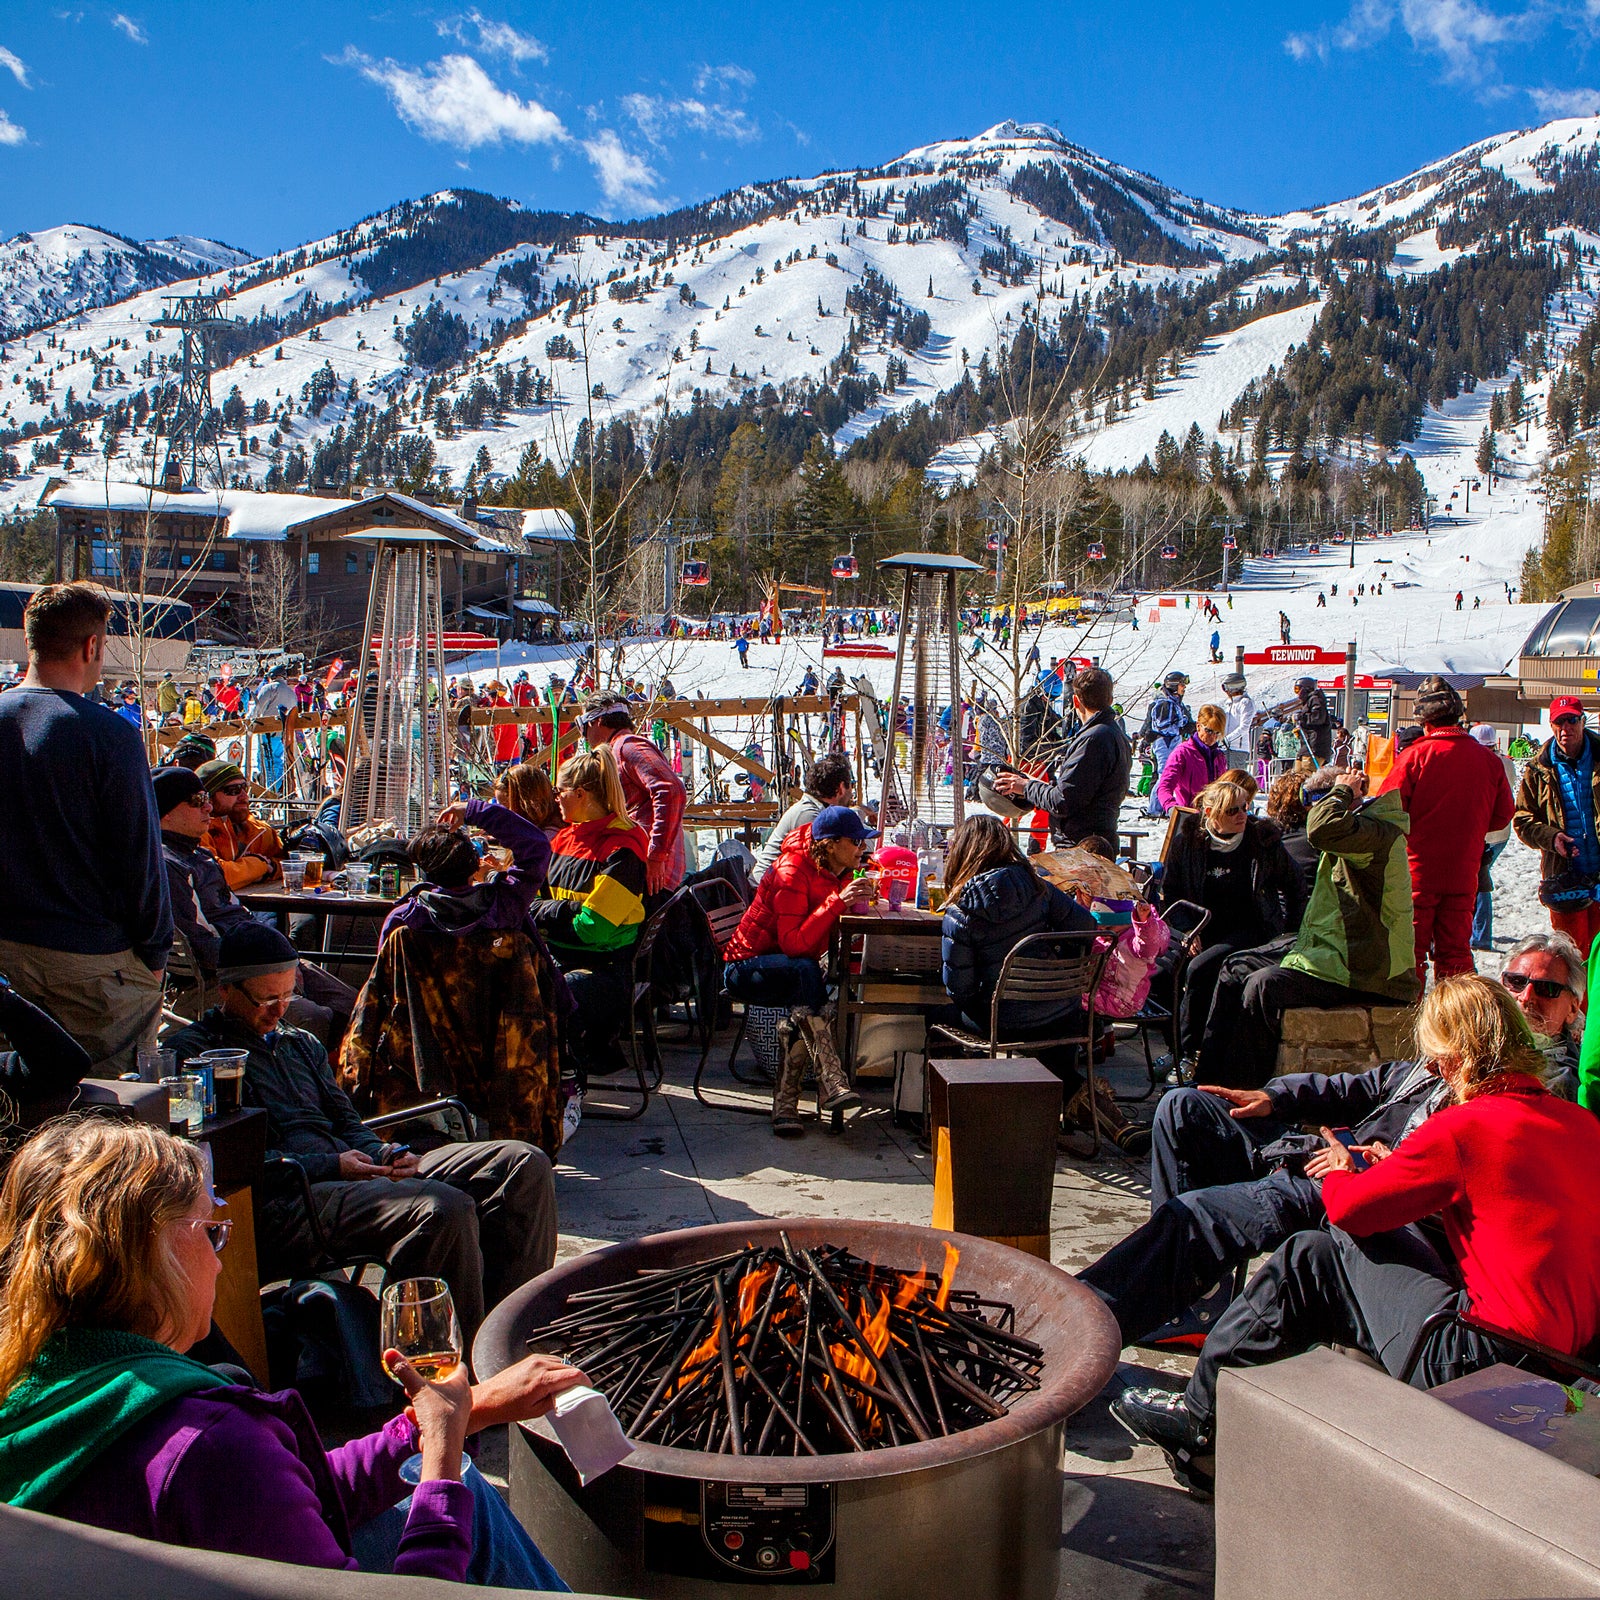 The Best Après Ski Clothing to Pack for Your Next Trip